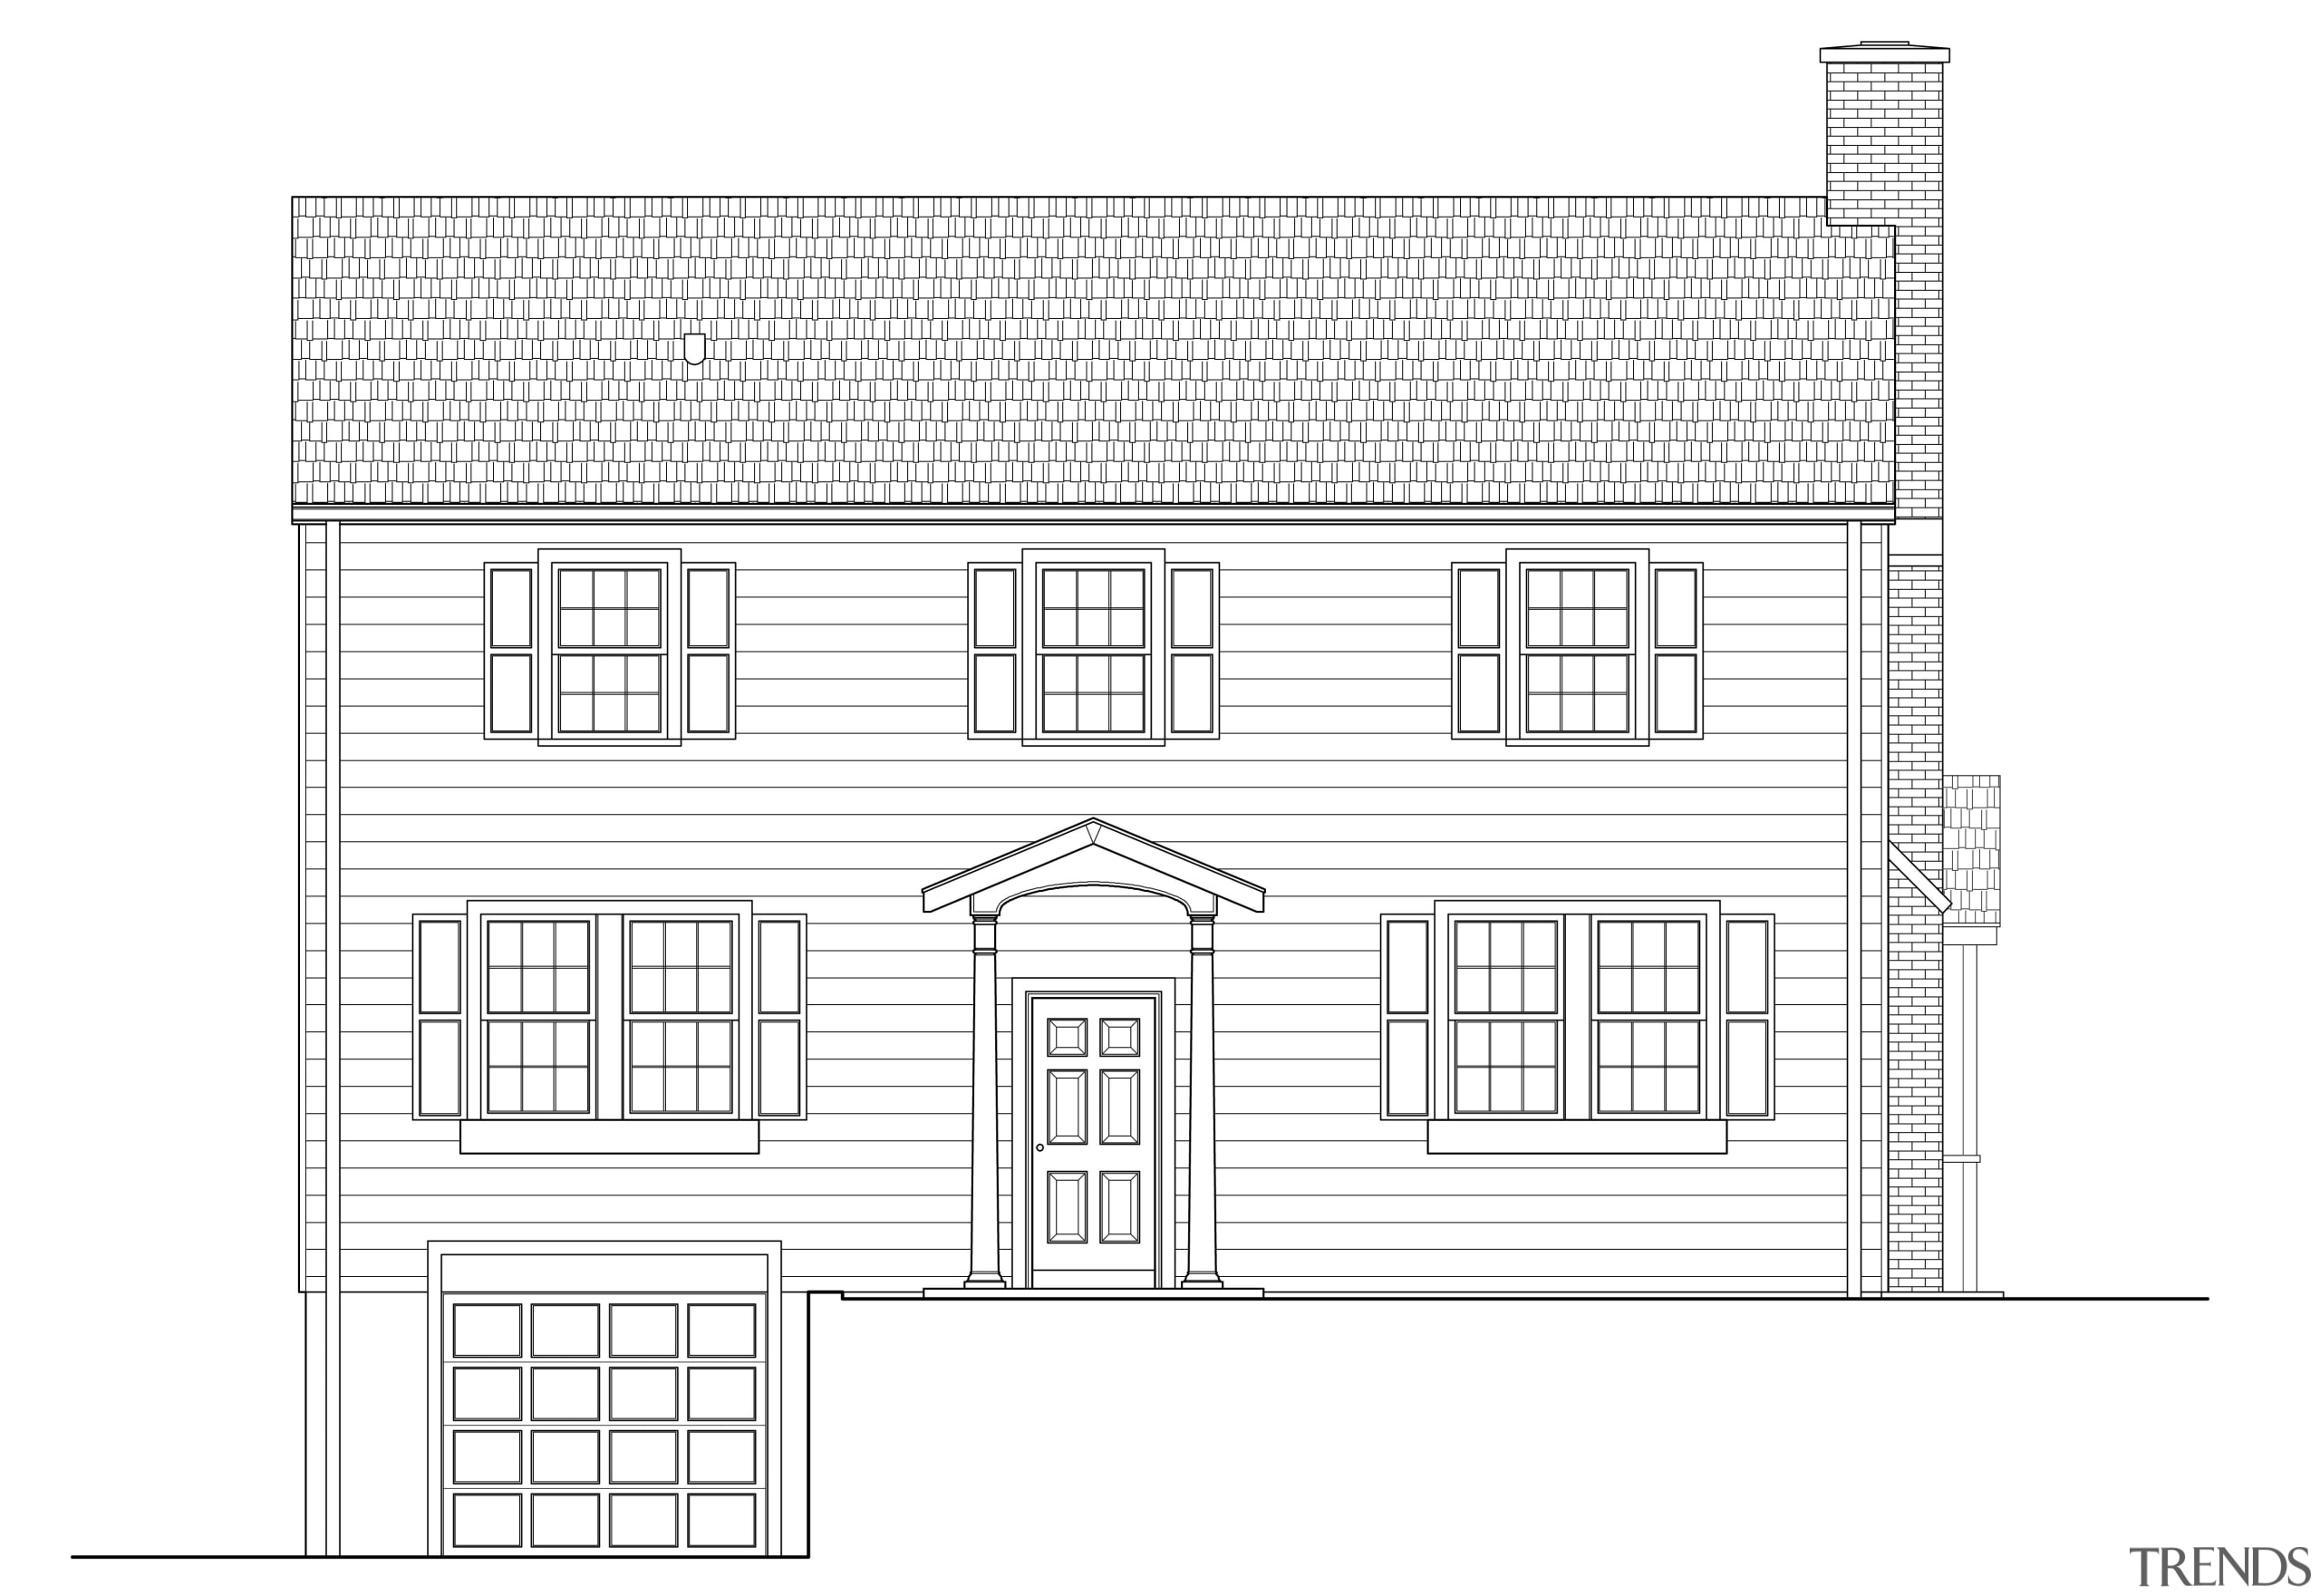 Exterior view of this traditional remodeled home - angle, architecture, area, black and white, design, diagram, drawing, elevation, facade, floor plan, font, home, house, line, line art, pattern, plan, product, product design, property, rectangle, square, structure, symmetry, text, white